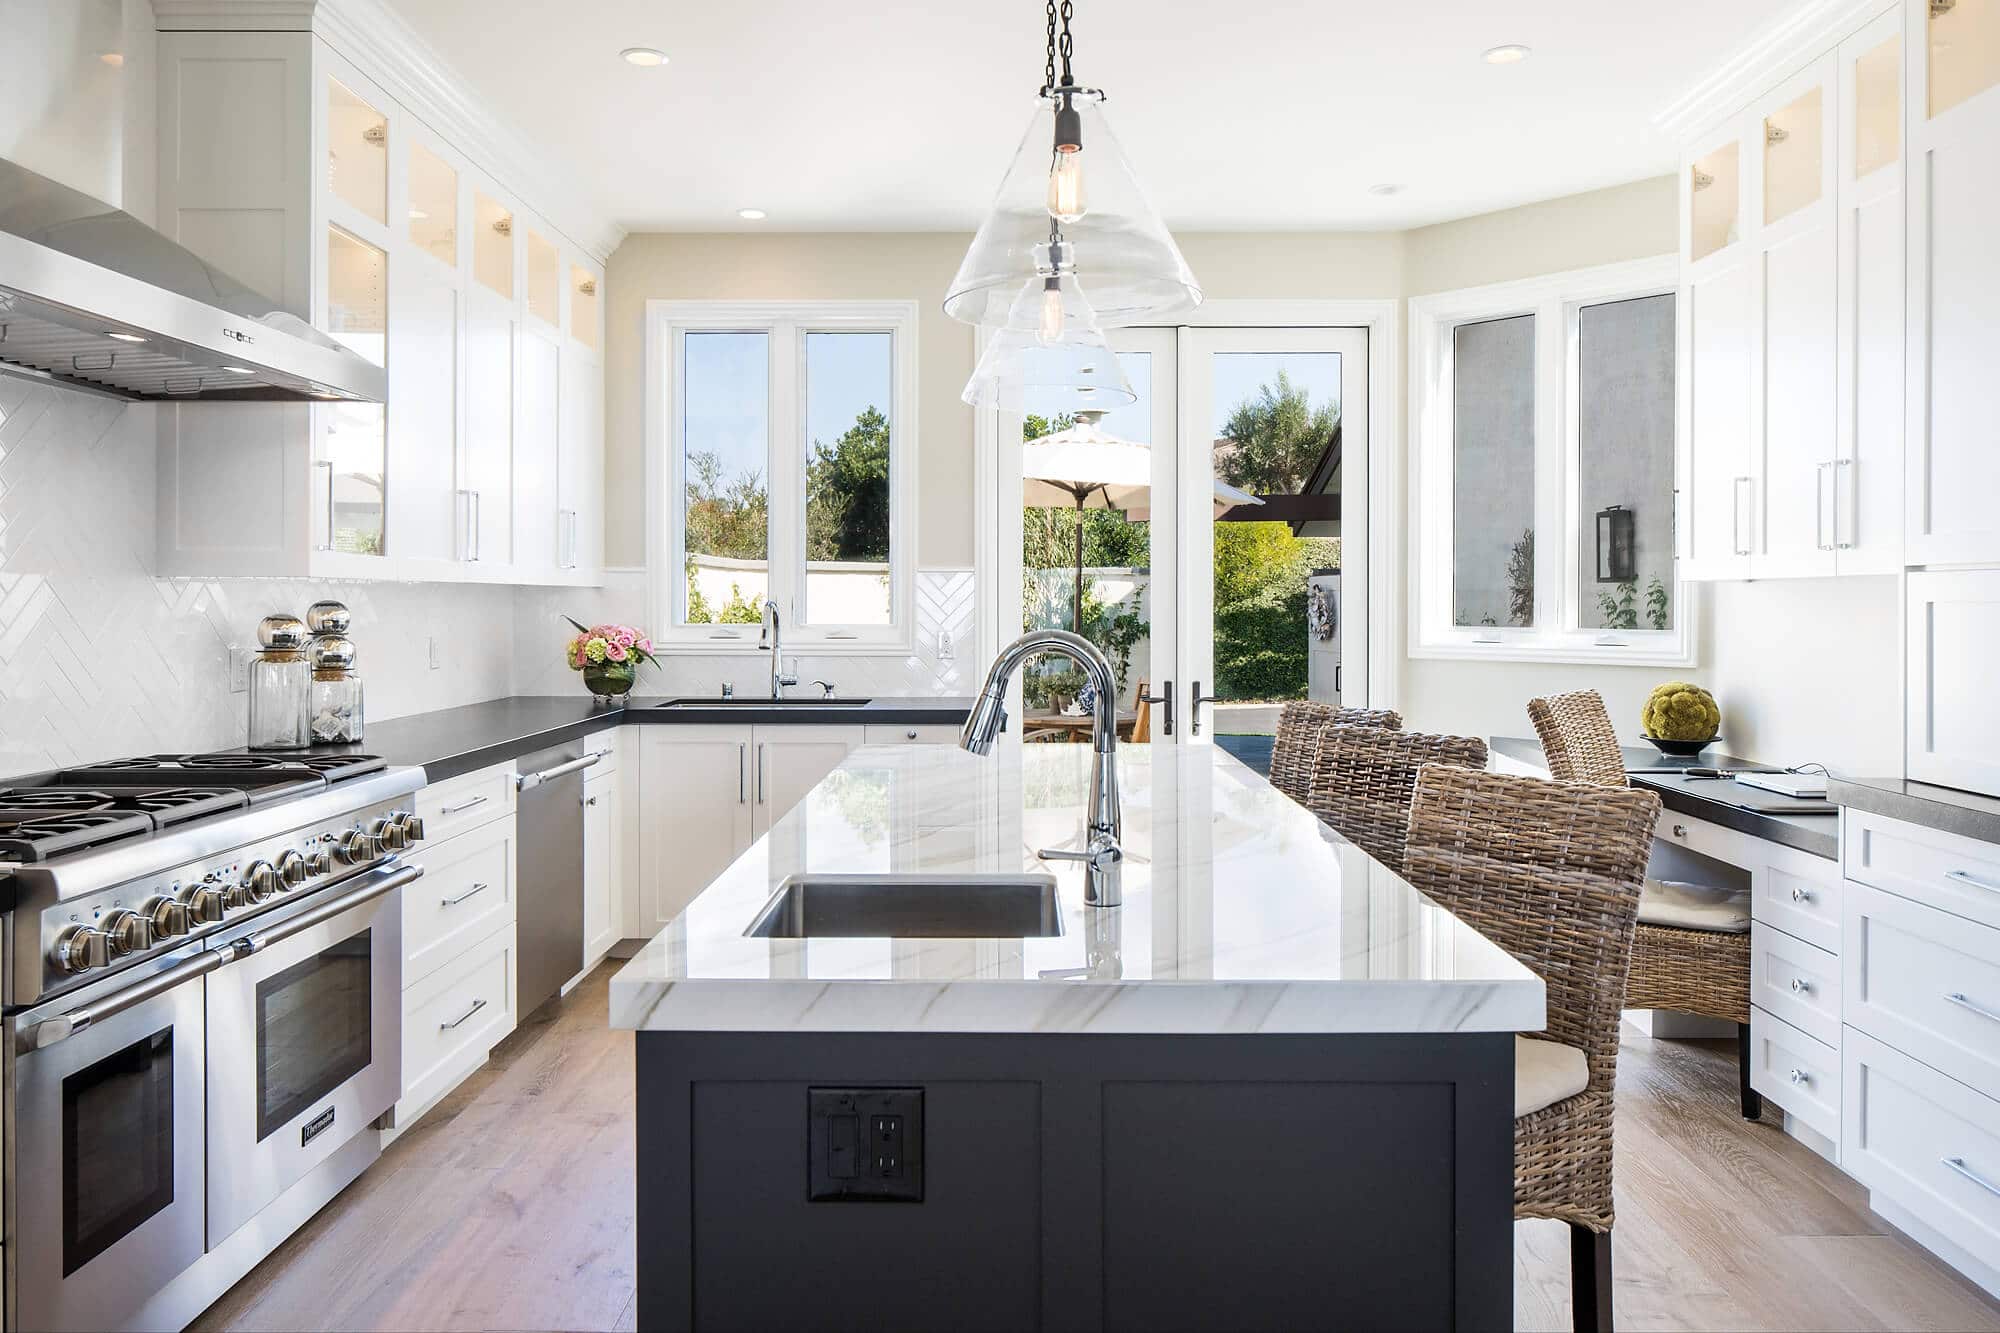 Kitchen Remodel Guide Planning, Budgeting and More